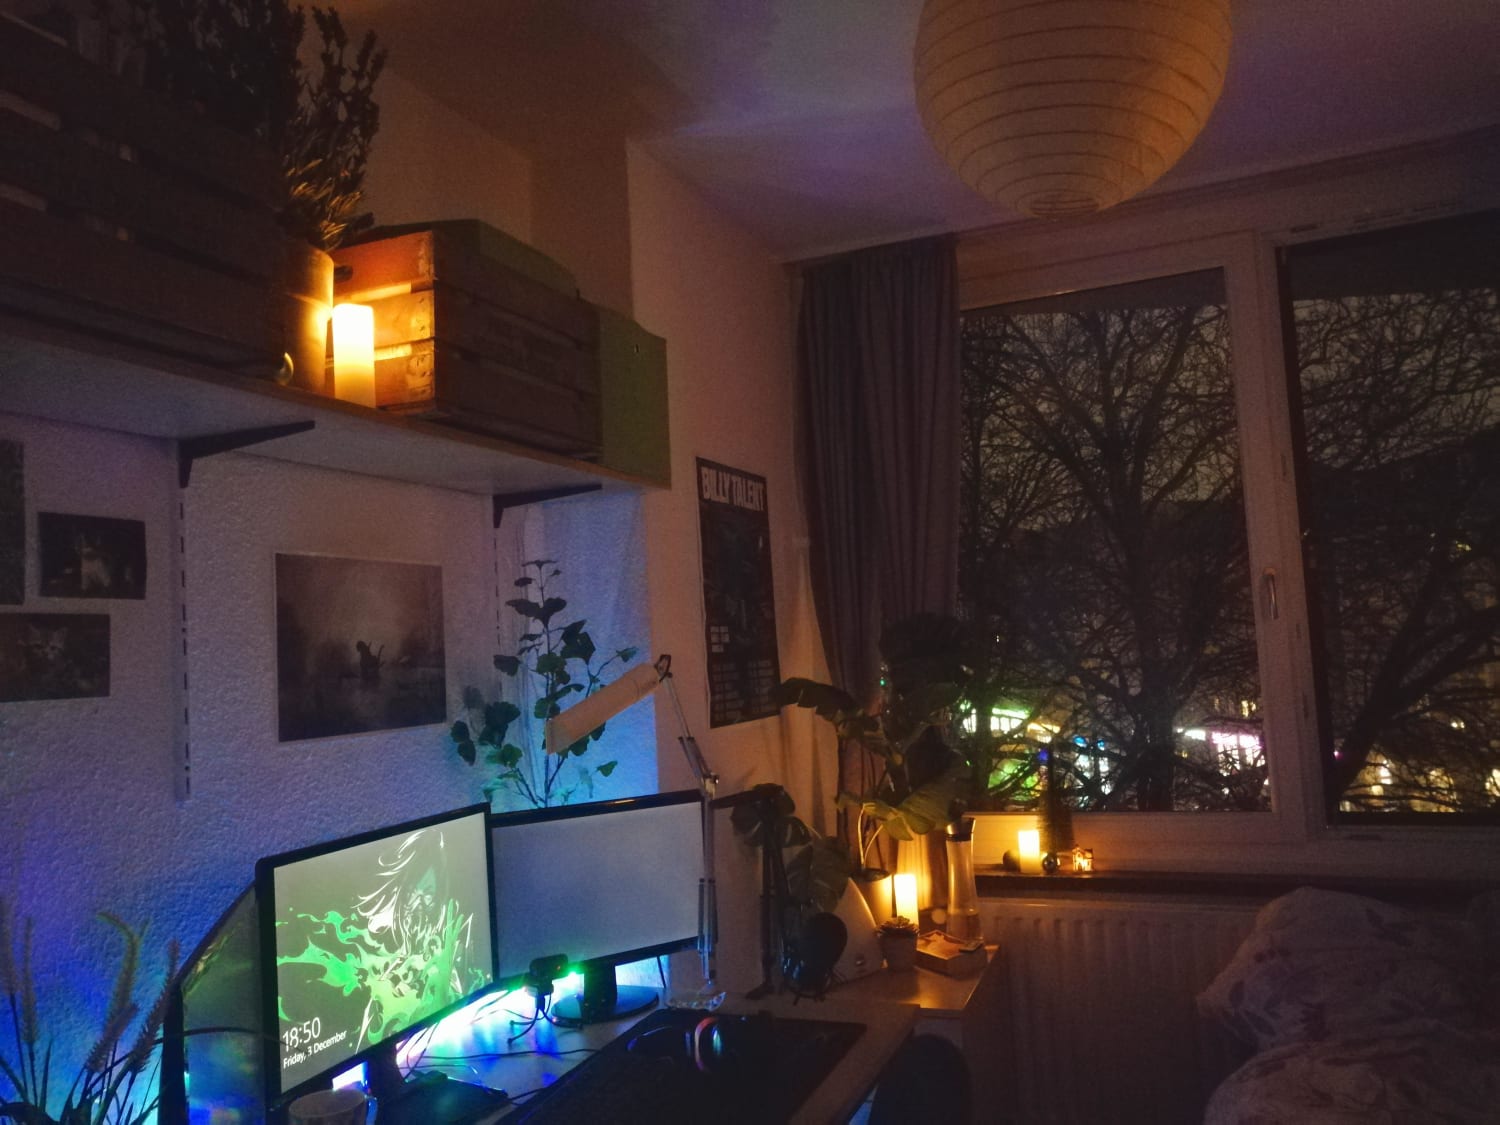 I bought some LED candles and now my place feels super cozy